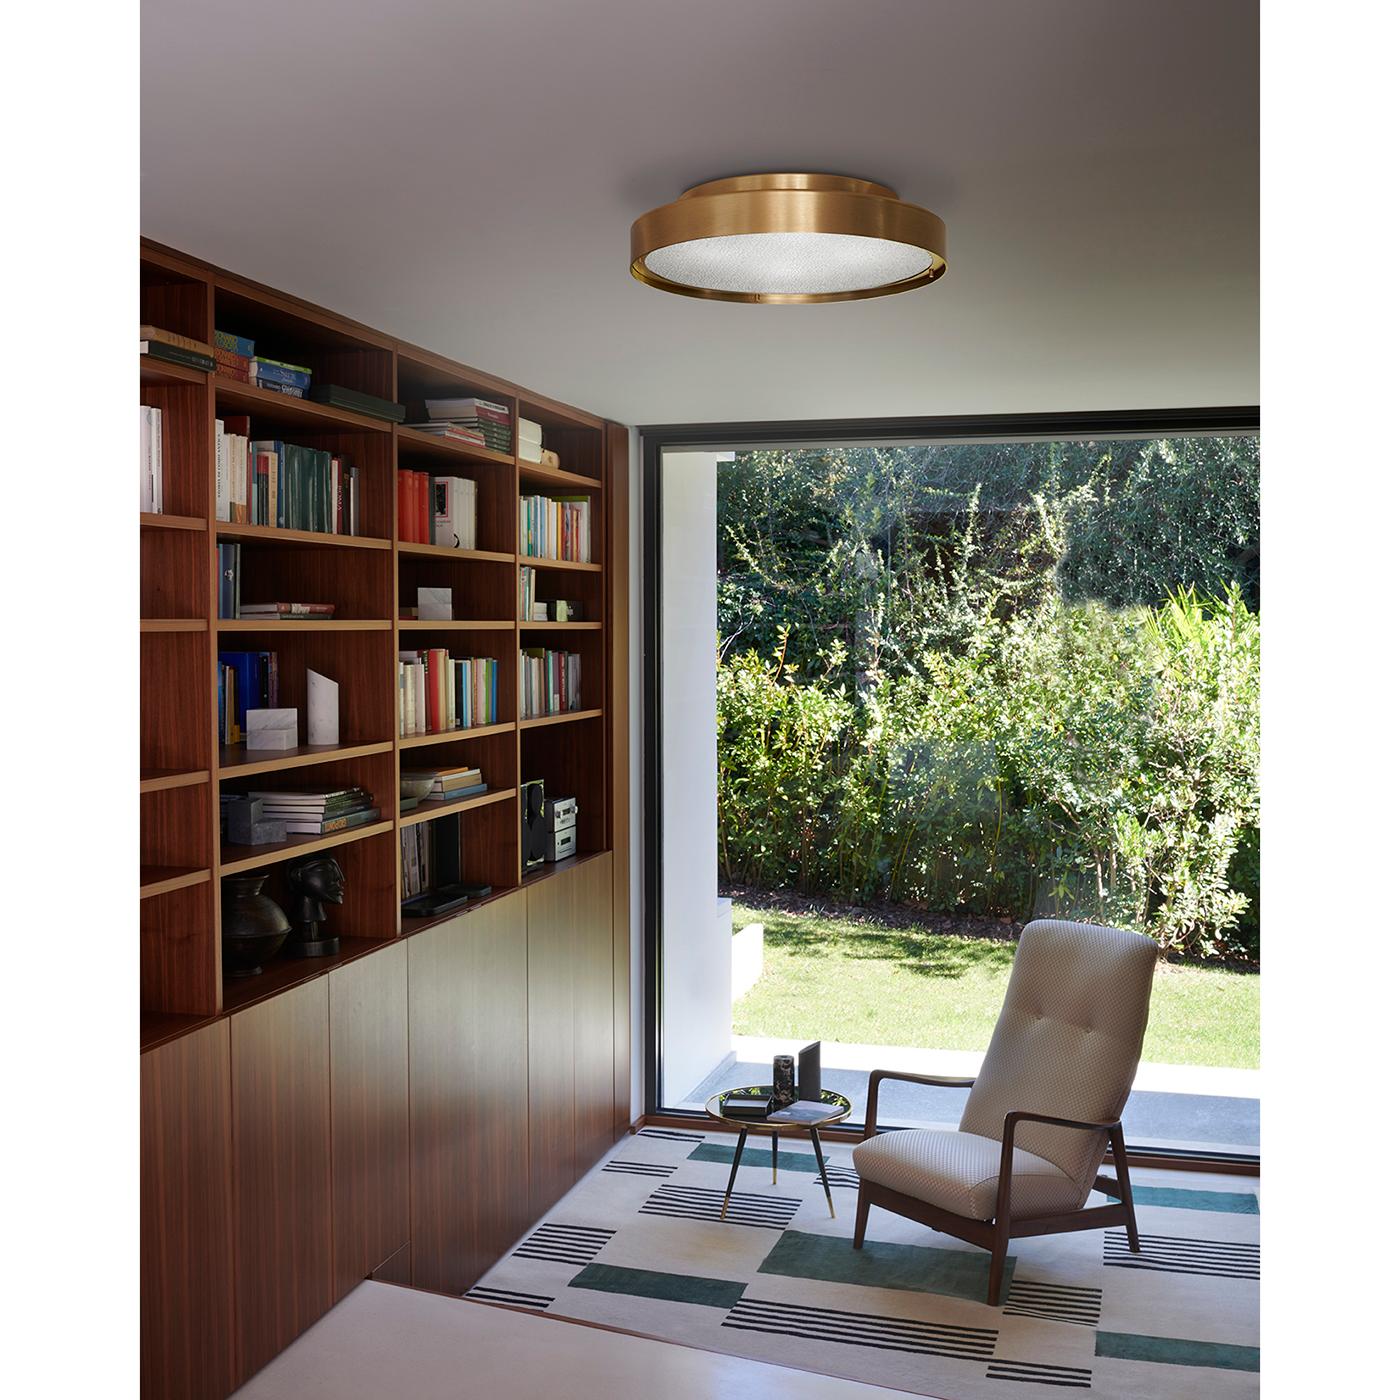 Ceiling and wall lamp 'Berlin' designed by Christophe Pillet in 2017.
Adjustable wall lamp giving indirect led light in metal. Manufactured by Oluce, Italy.

Christophe Pillet designed Berlin, an object that calls into question the common